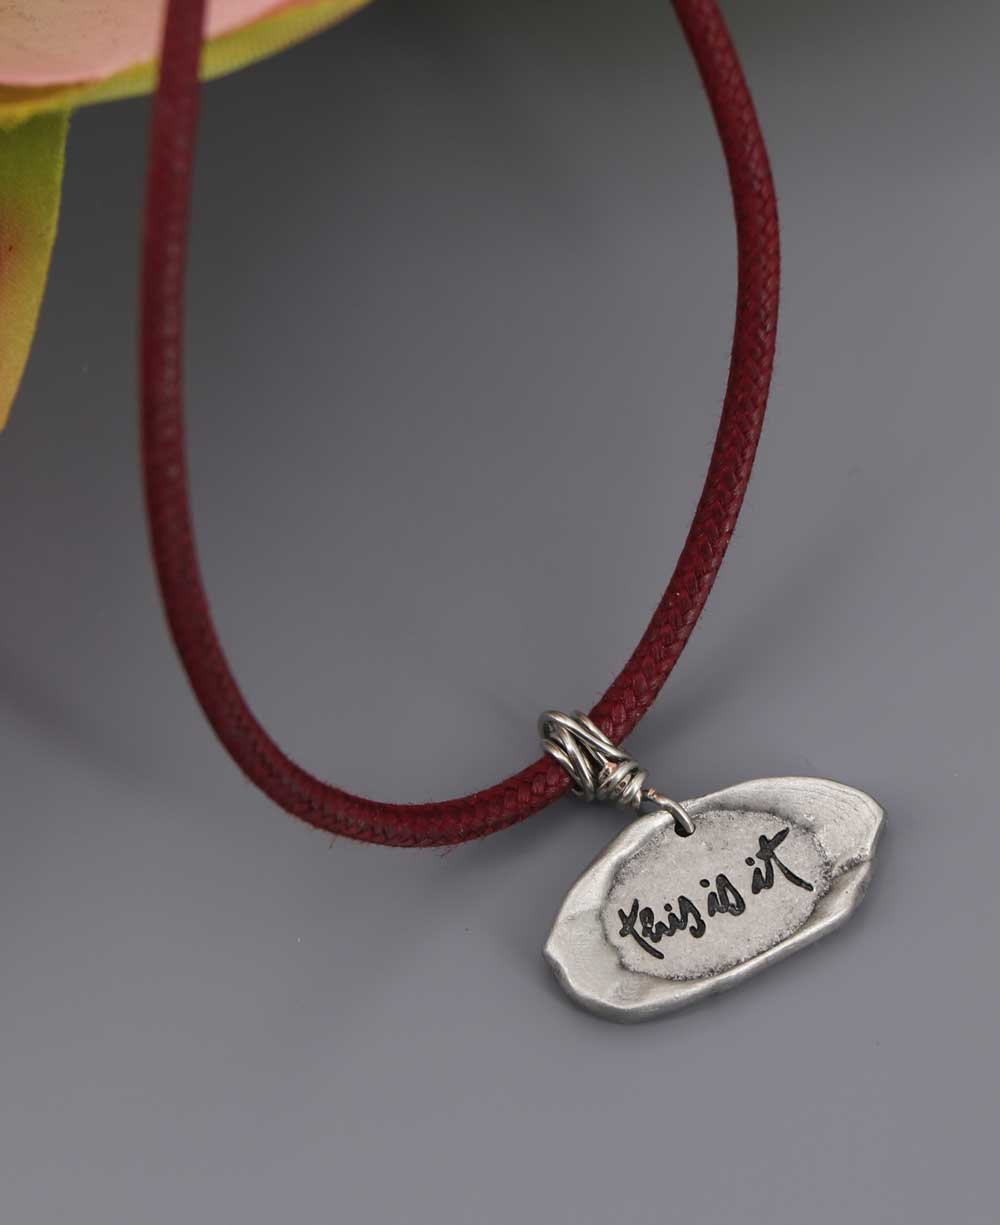 Thich Nhat Hanh This Is It Pendant Necklace - Necklaces